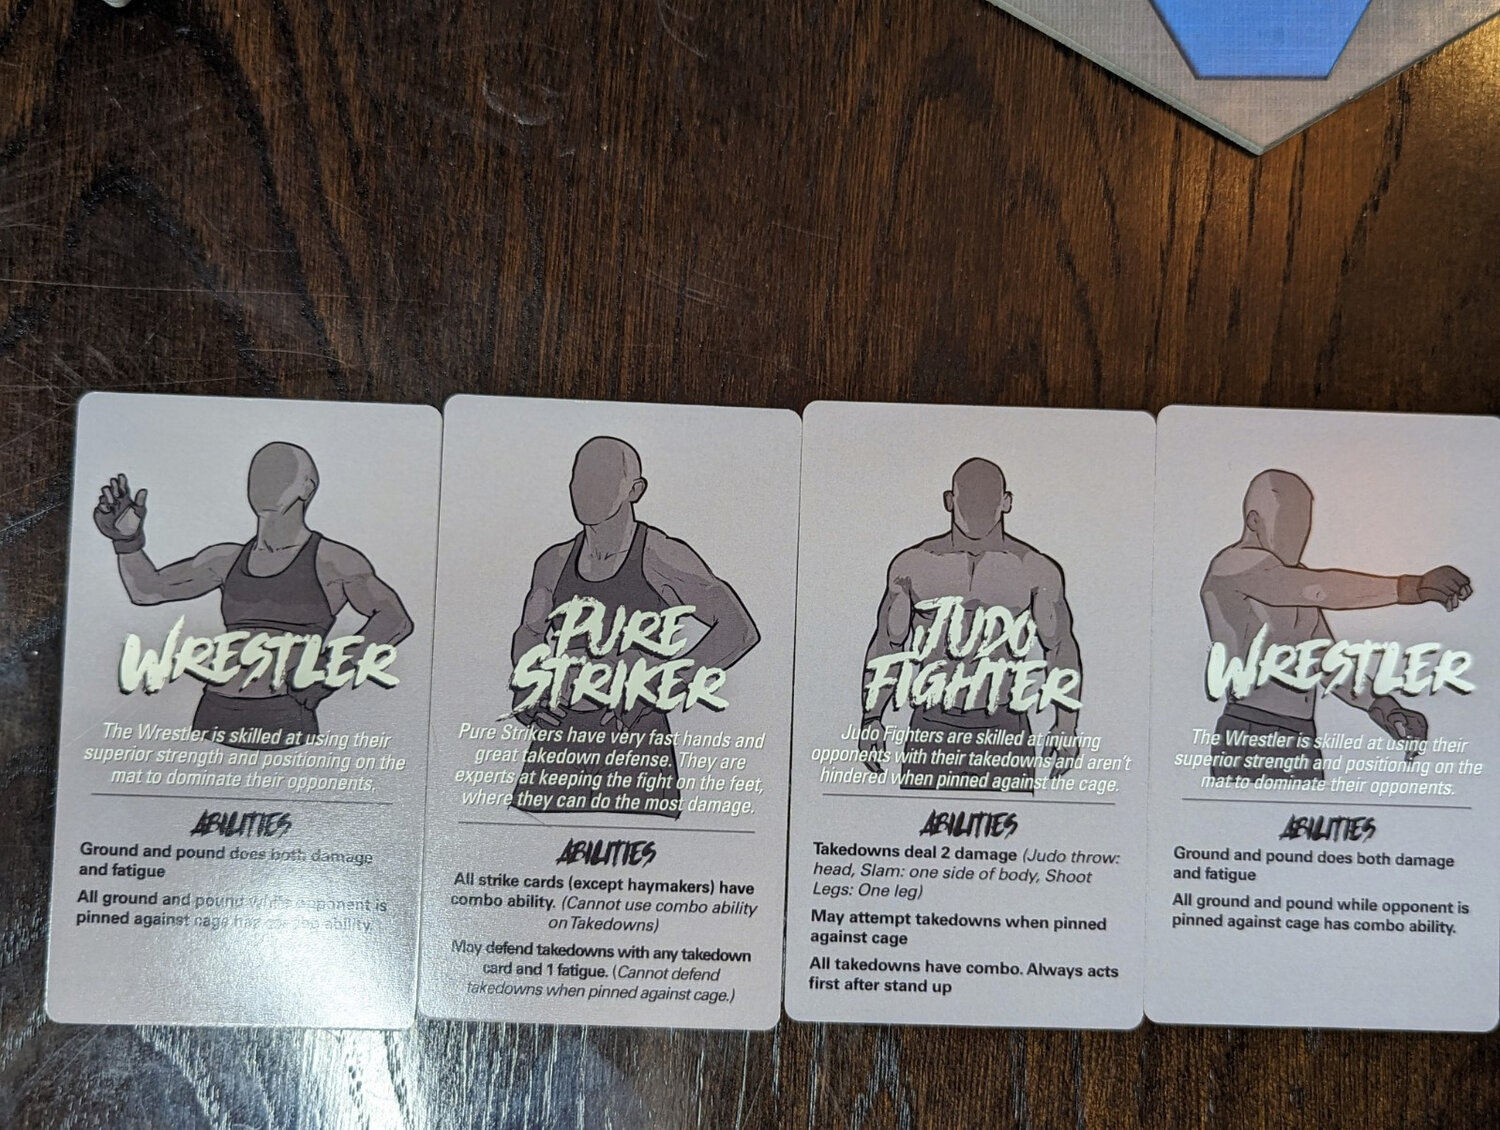 Caged In is bringing mixed martial arts to the world of board games and grows into crowfunding on GameFound.com on Wednesday, March 29. Pictured are some of the cards used in the game.